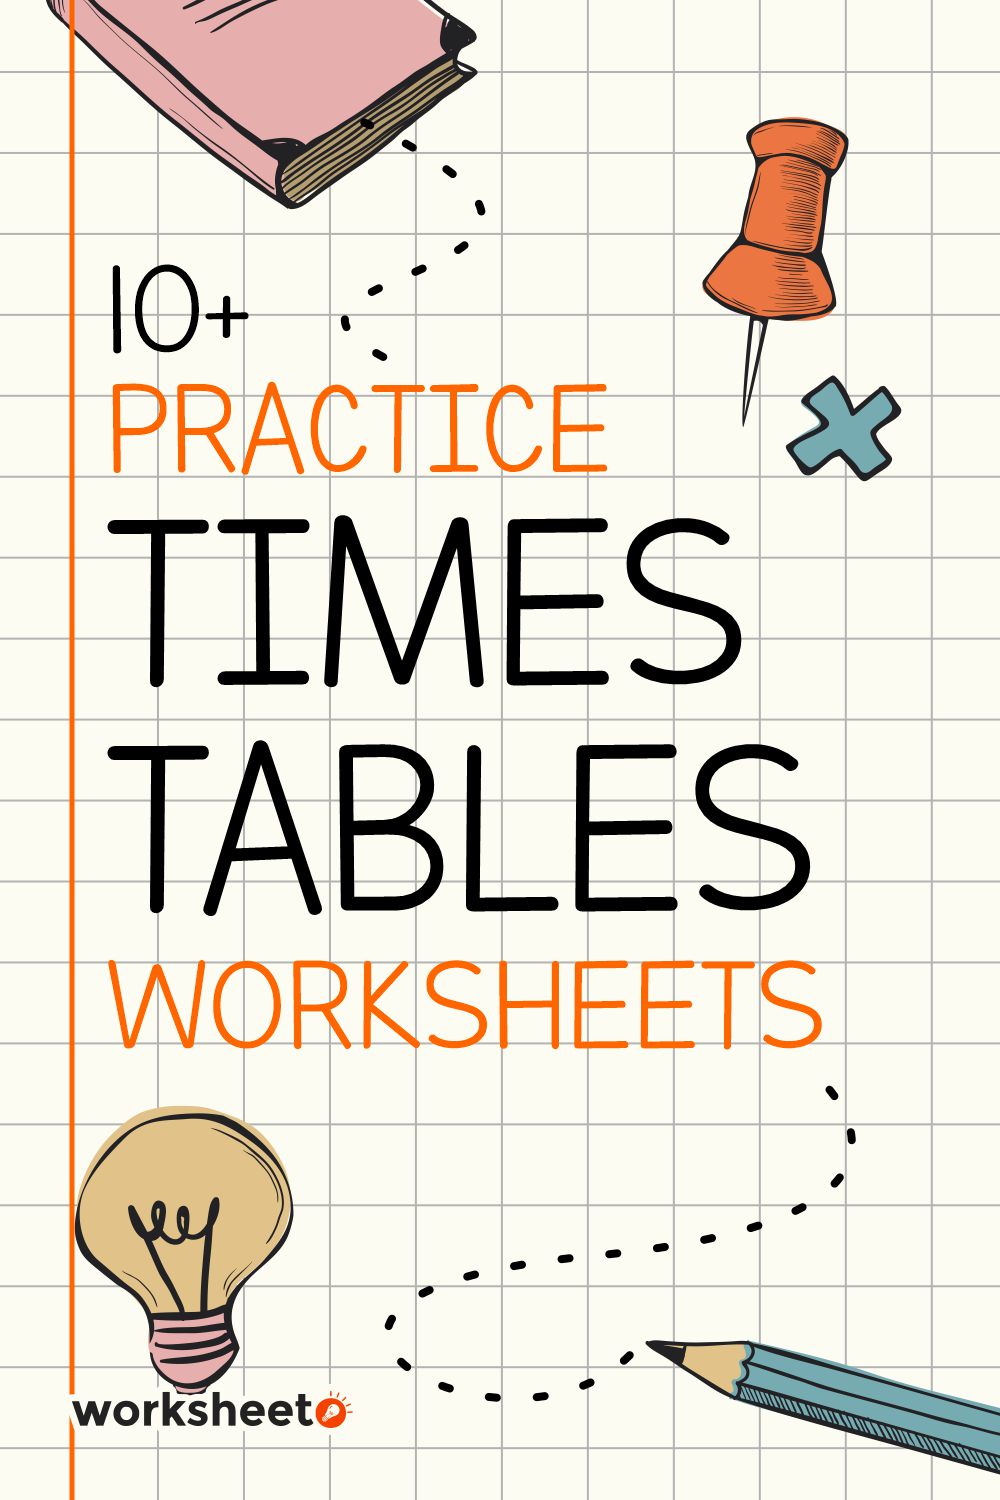 13 Images of Practice Times Tables Worksheets